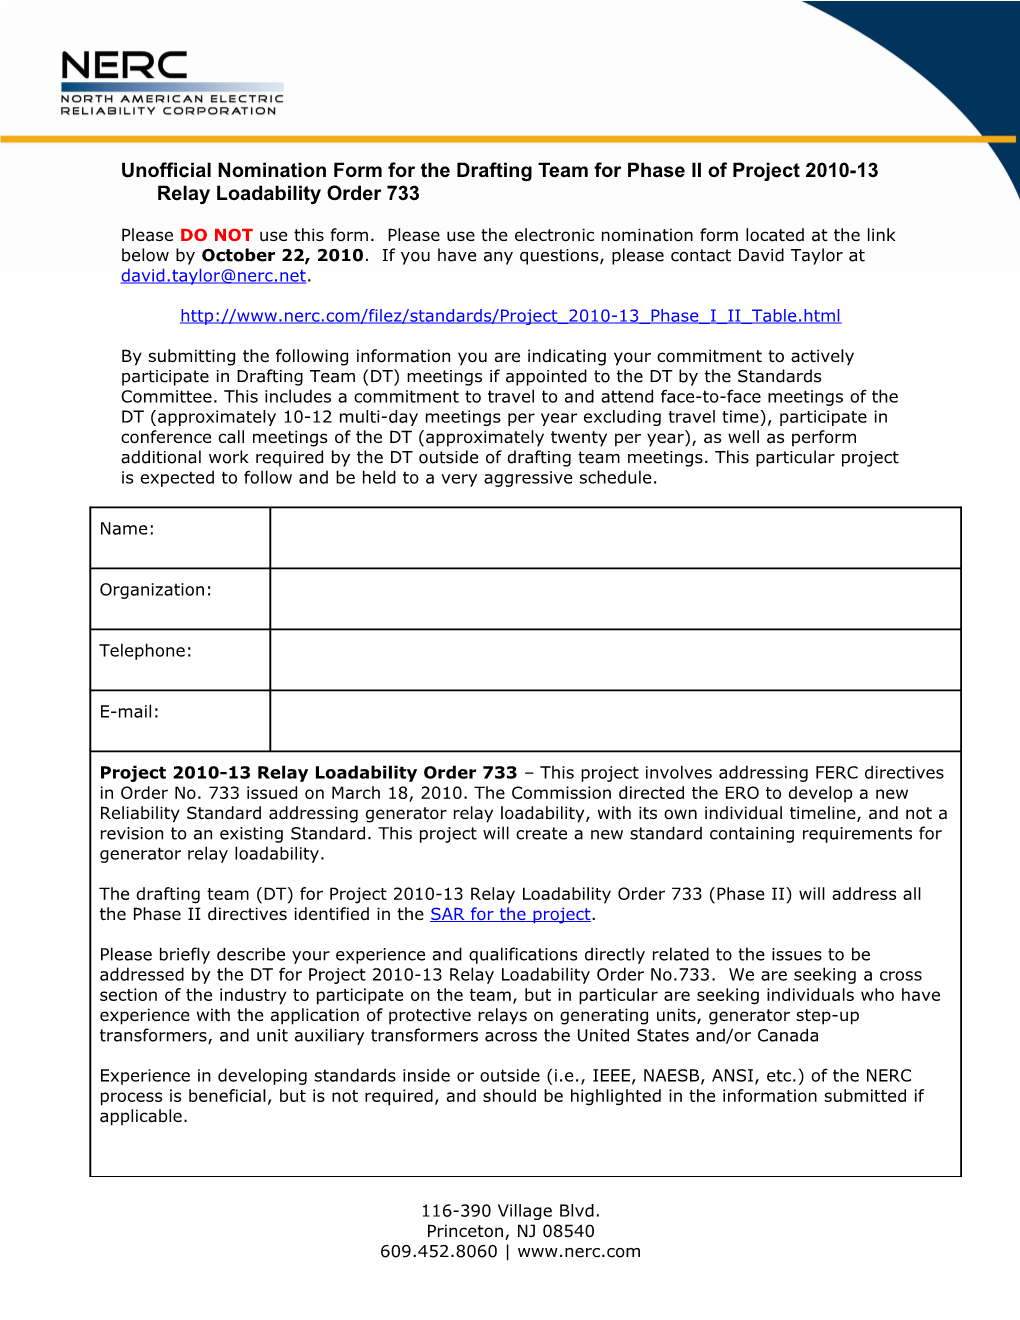 Drafting Team Nomination Form Project 2010-13 Relay Loadability Order - PRC-023